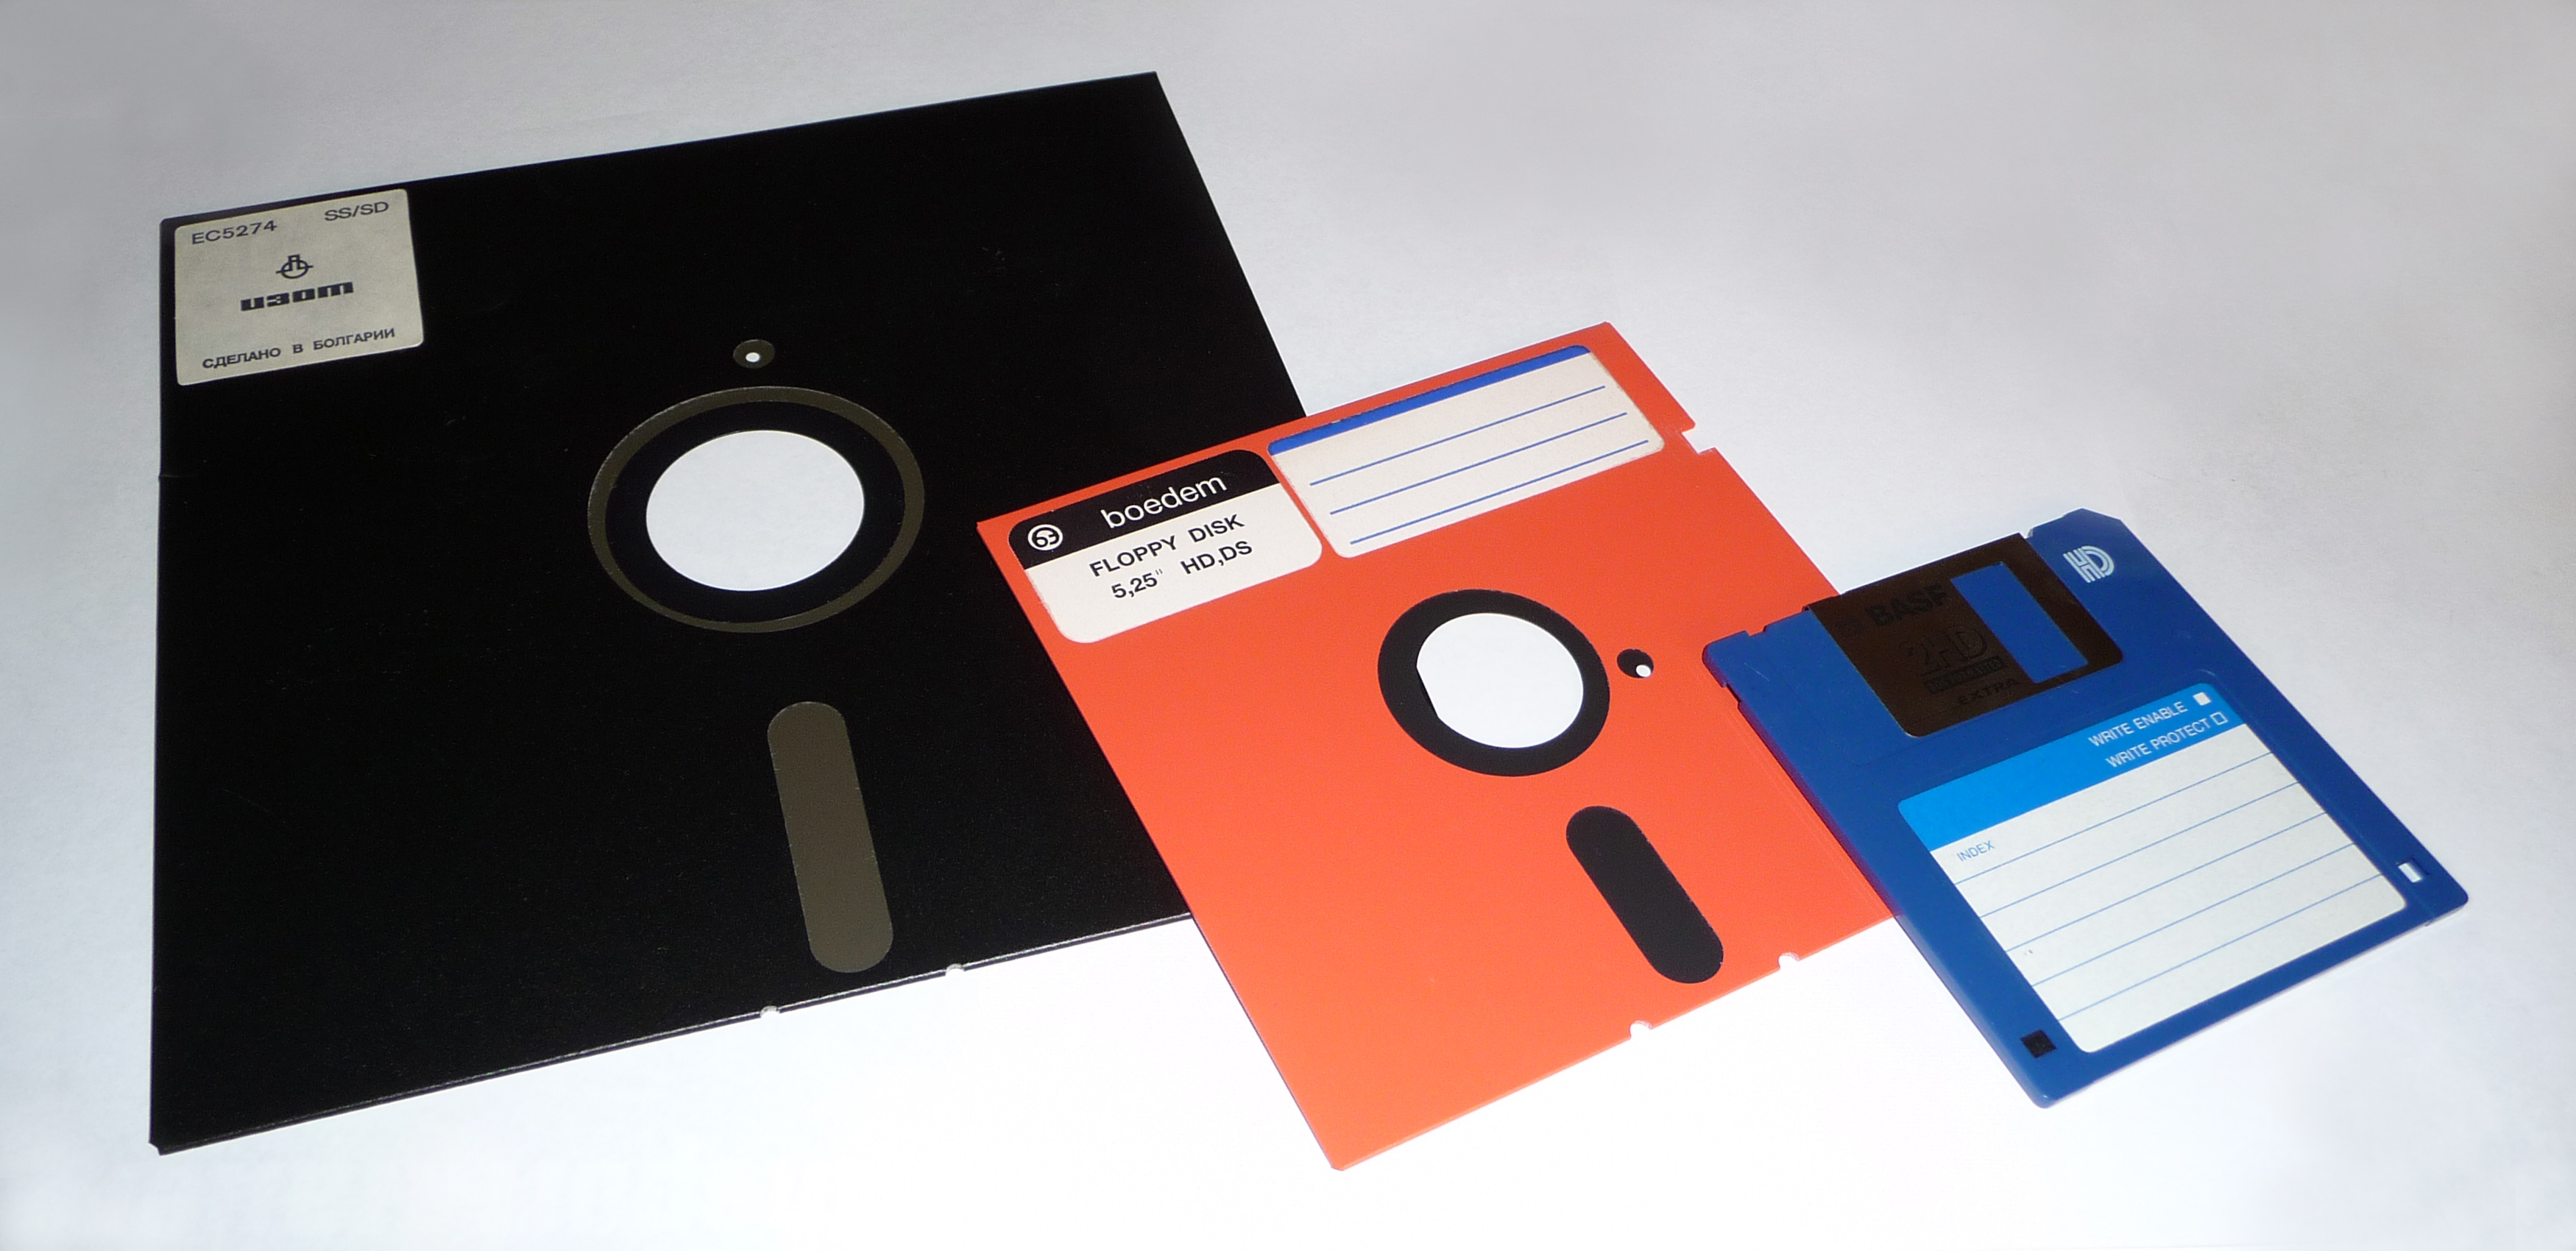 A disk with limited storage space.